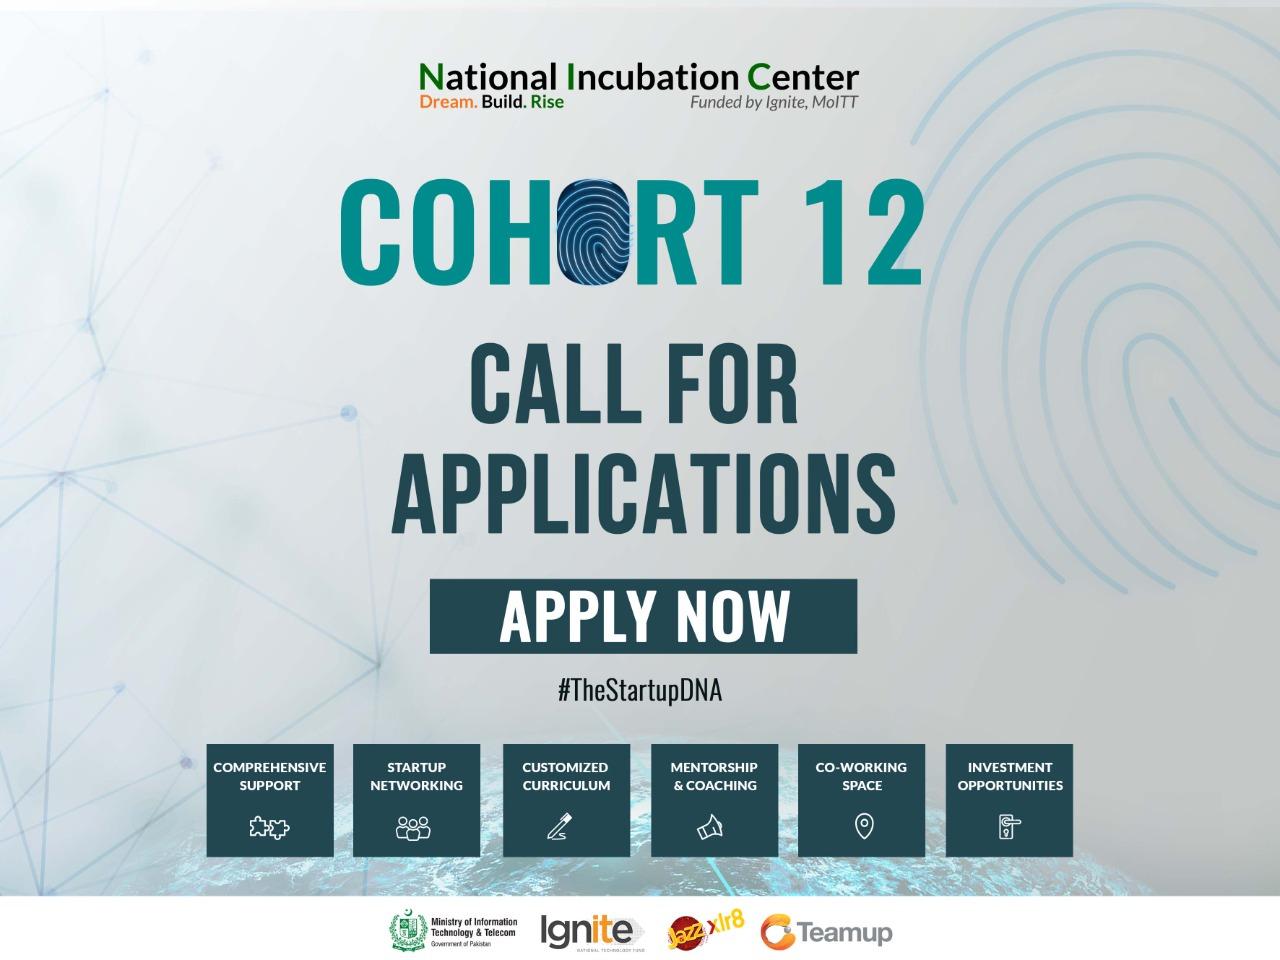 Applications Open for National Incubation Center’s 12th Start-up Incubation Cohort